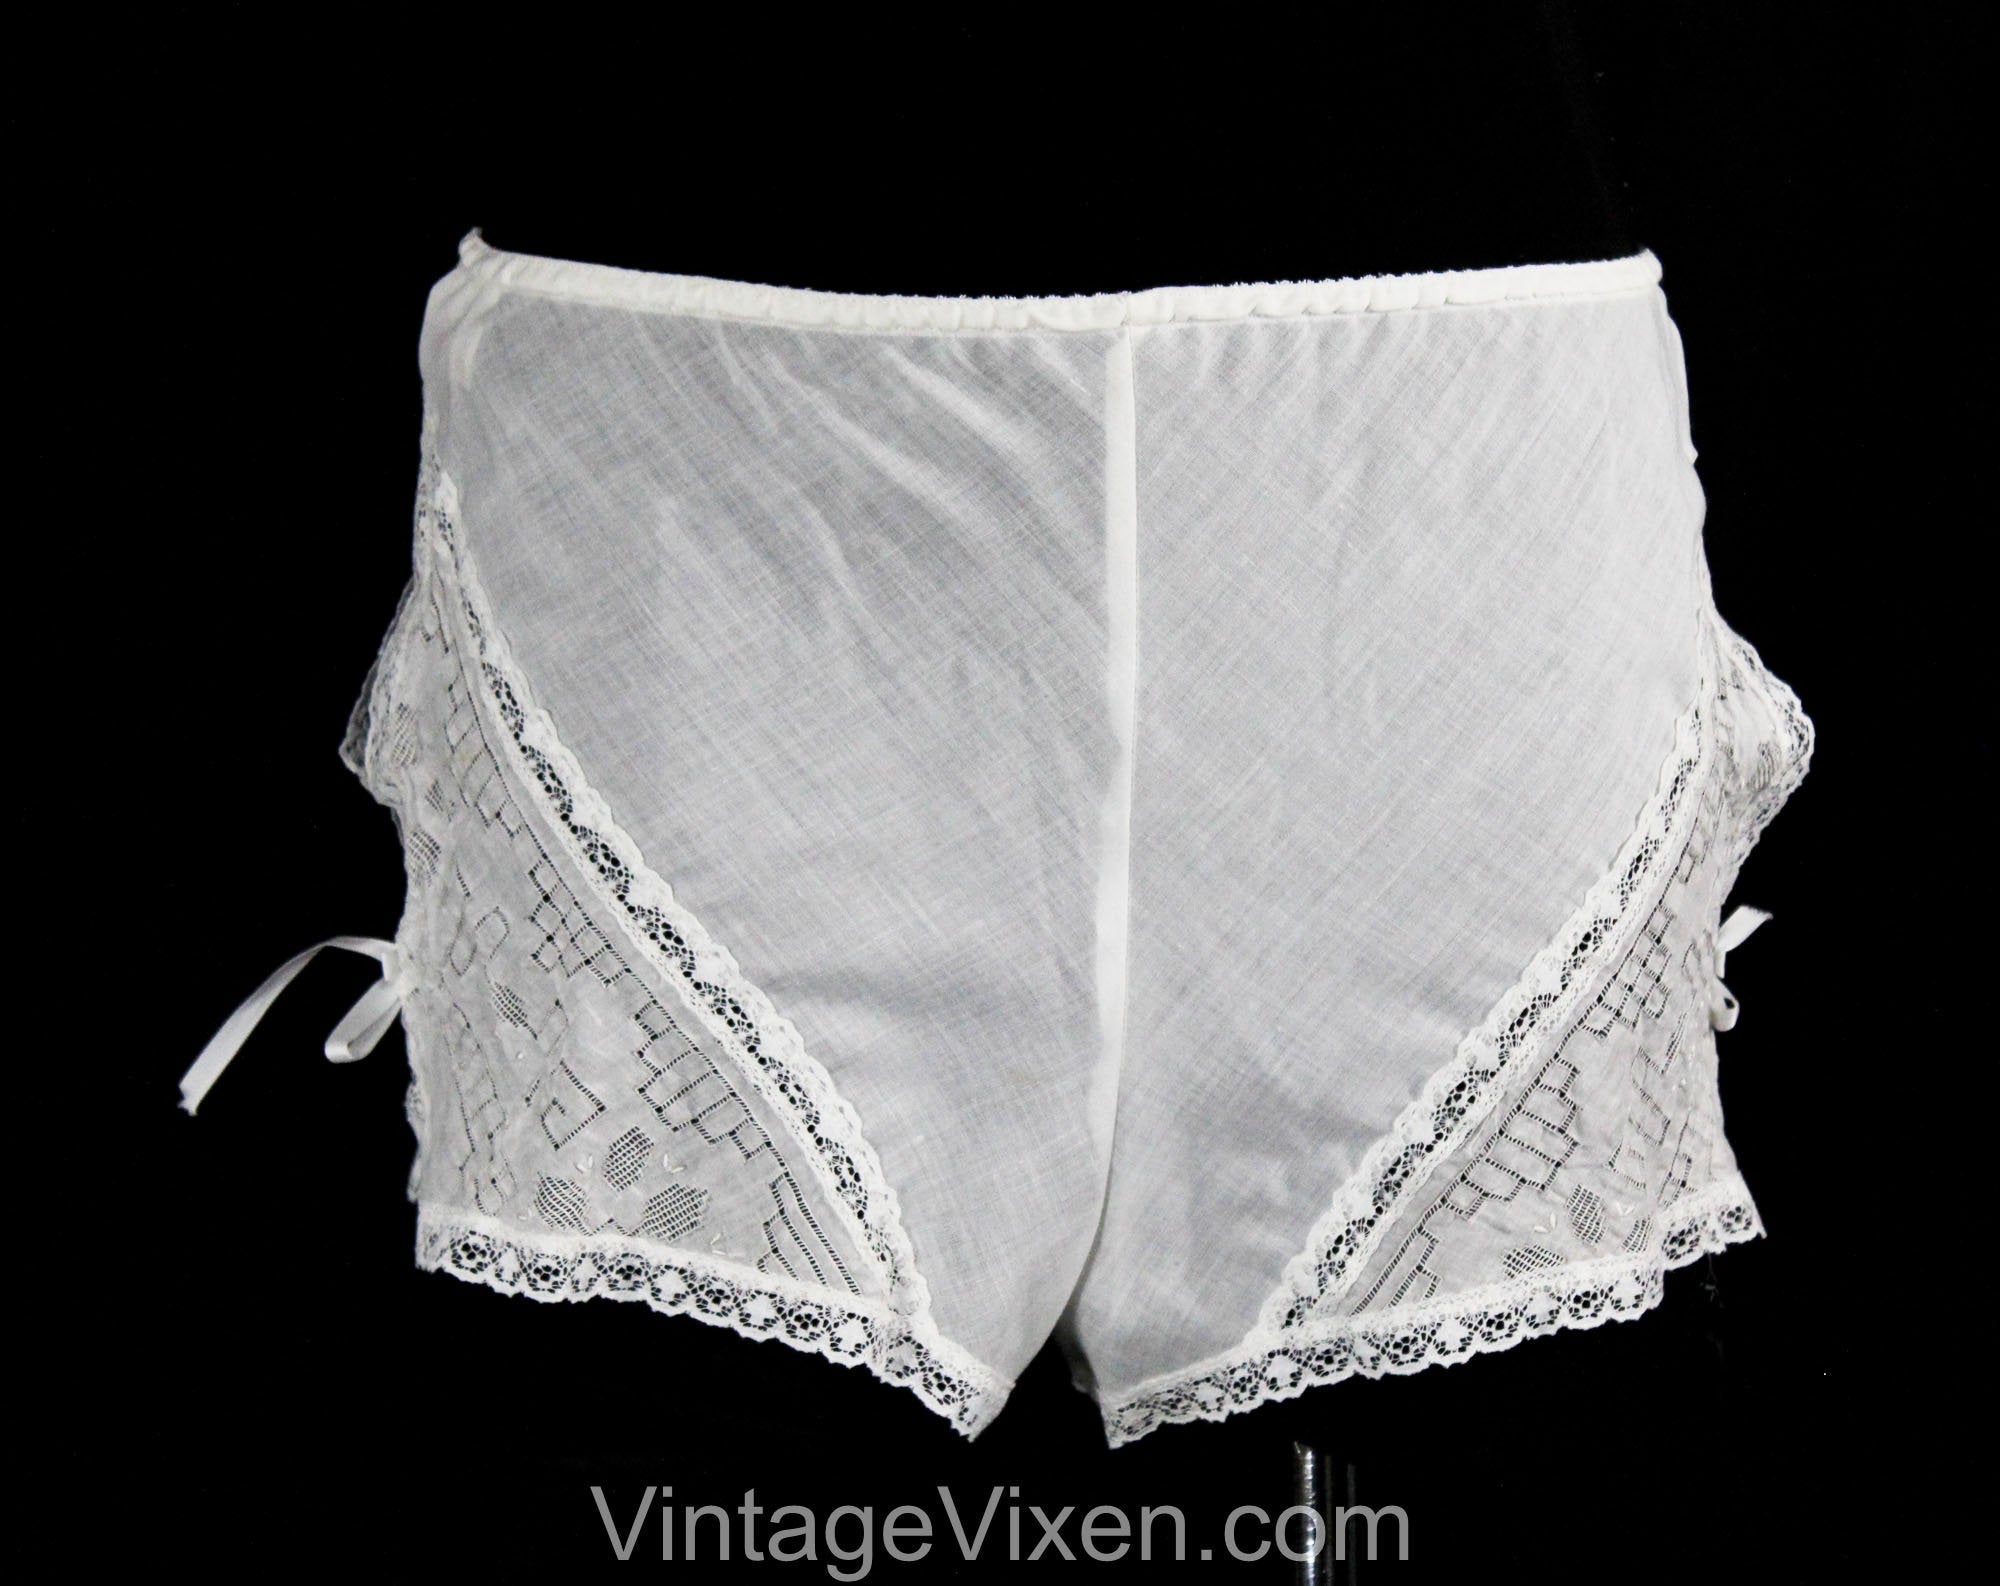 XS Antique Inspired Tap Panty Bloomer - Pretty 1980s Retro Lingerie ...